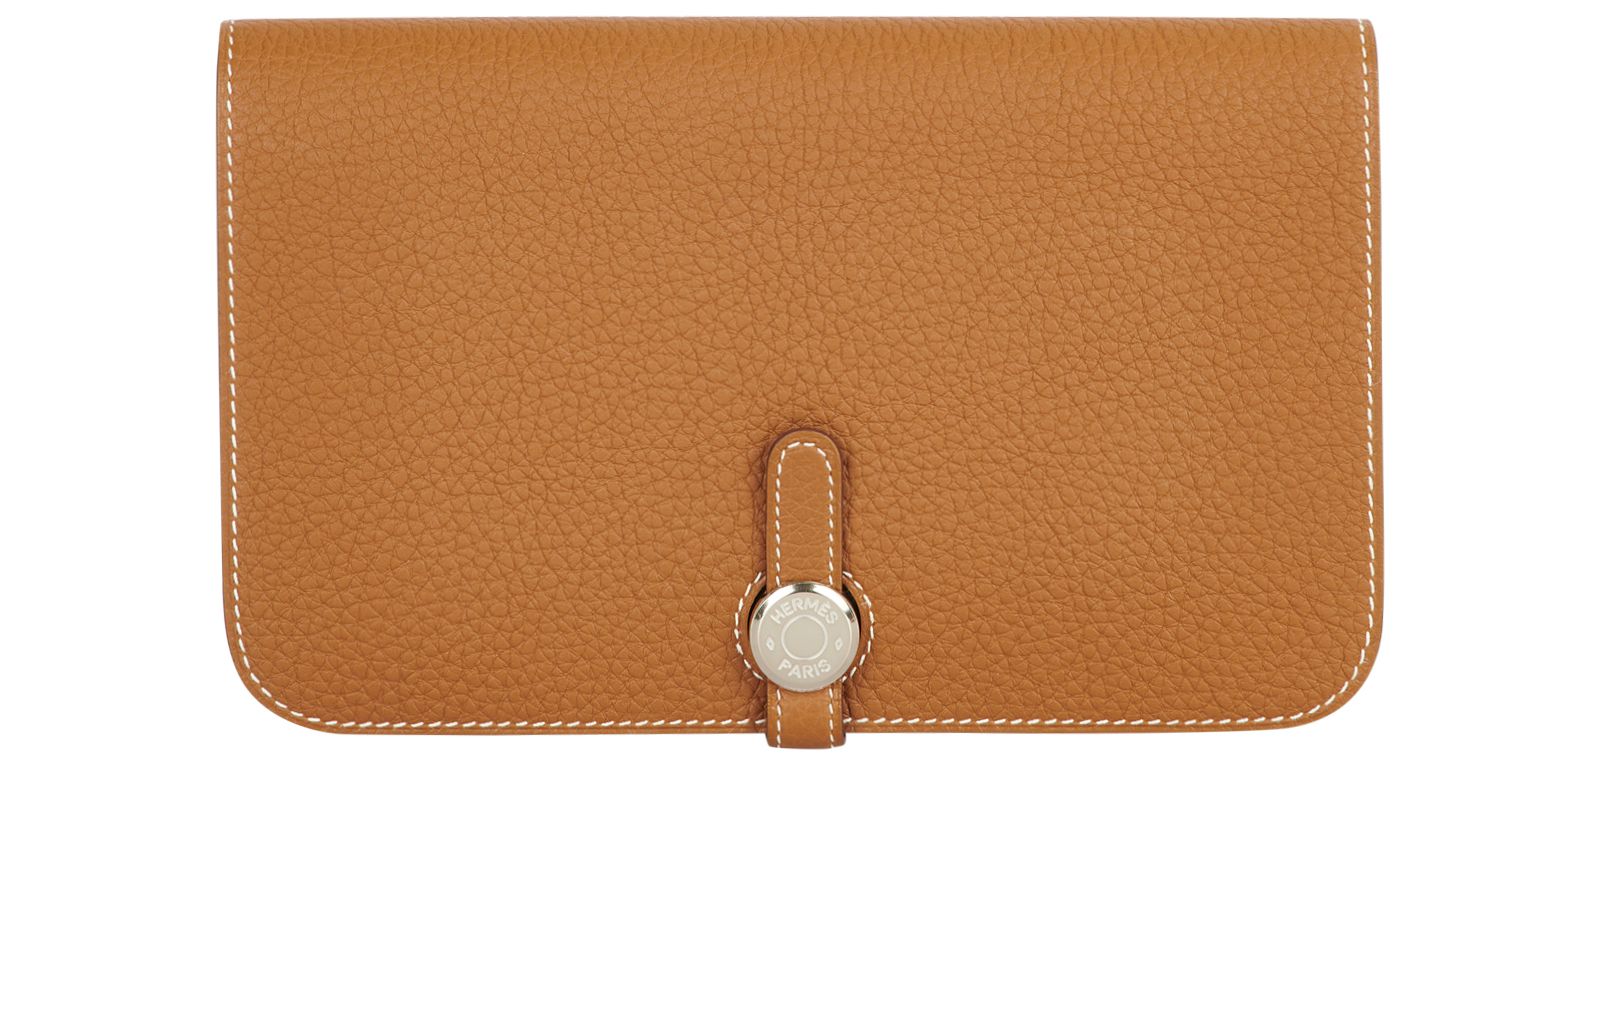 Hermes-Dogon Compact Wallet - Couture Traders